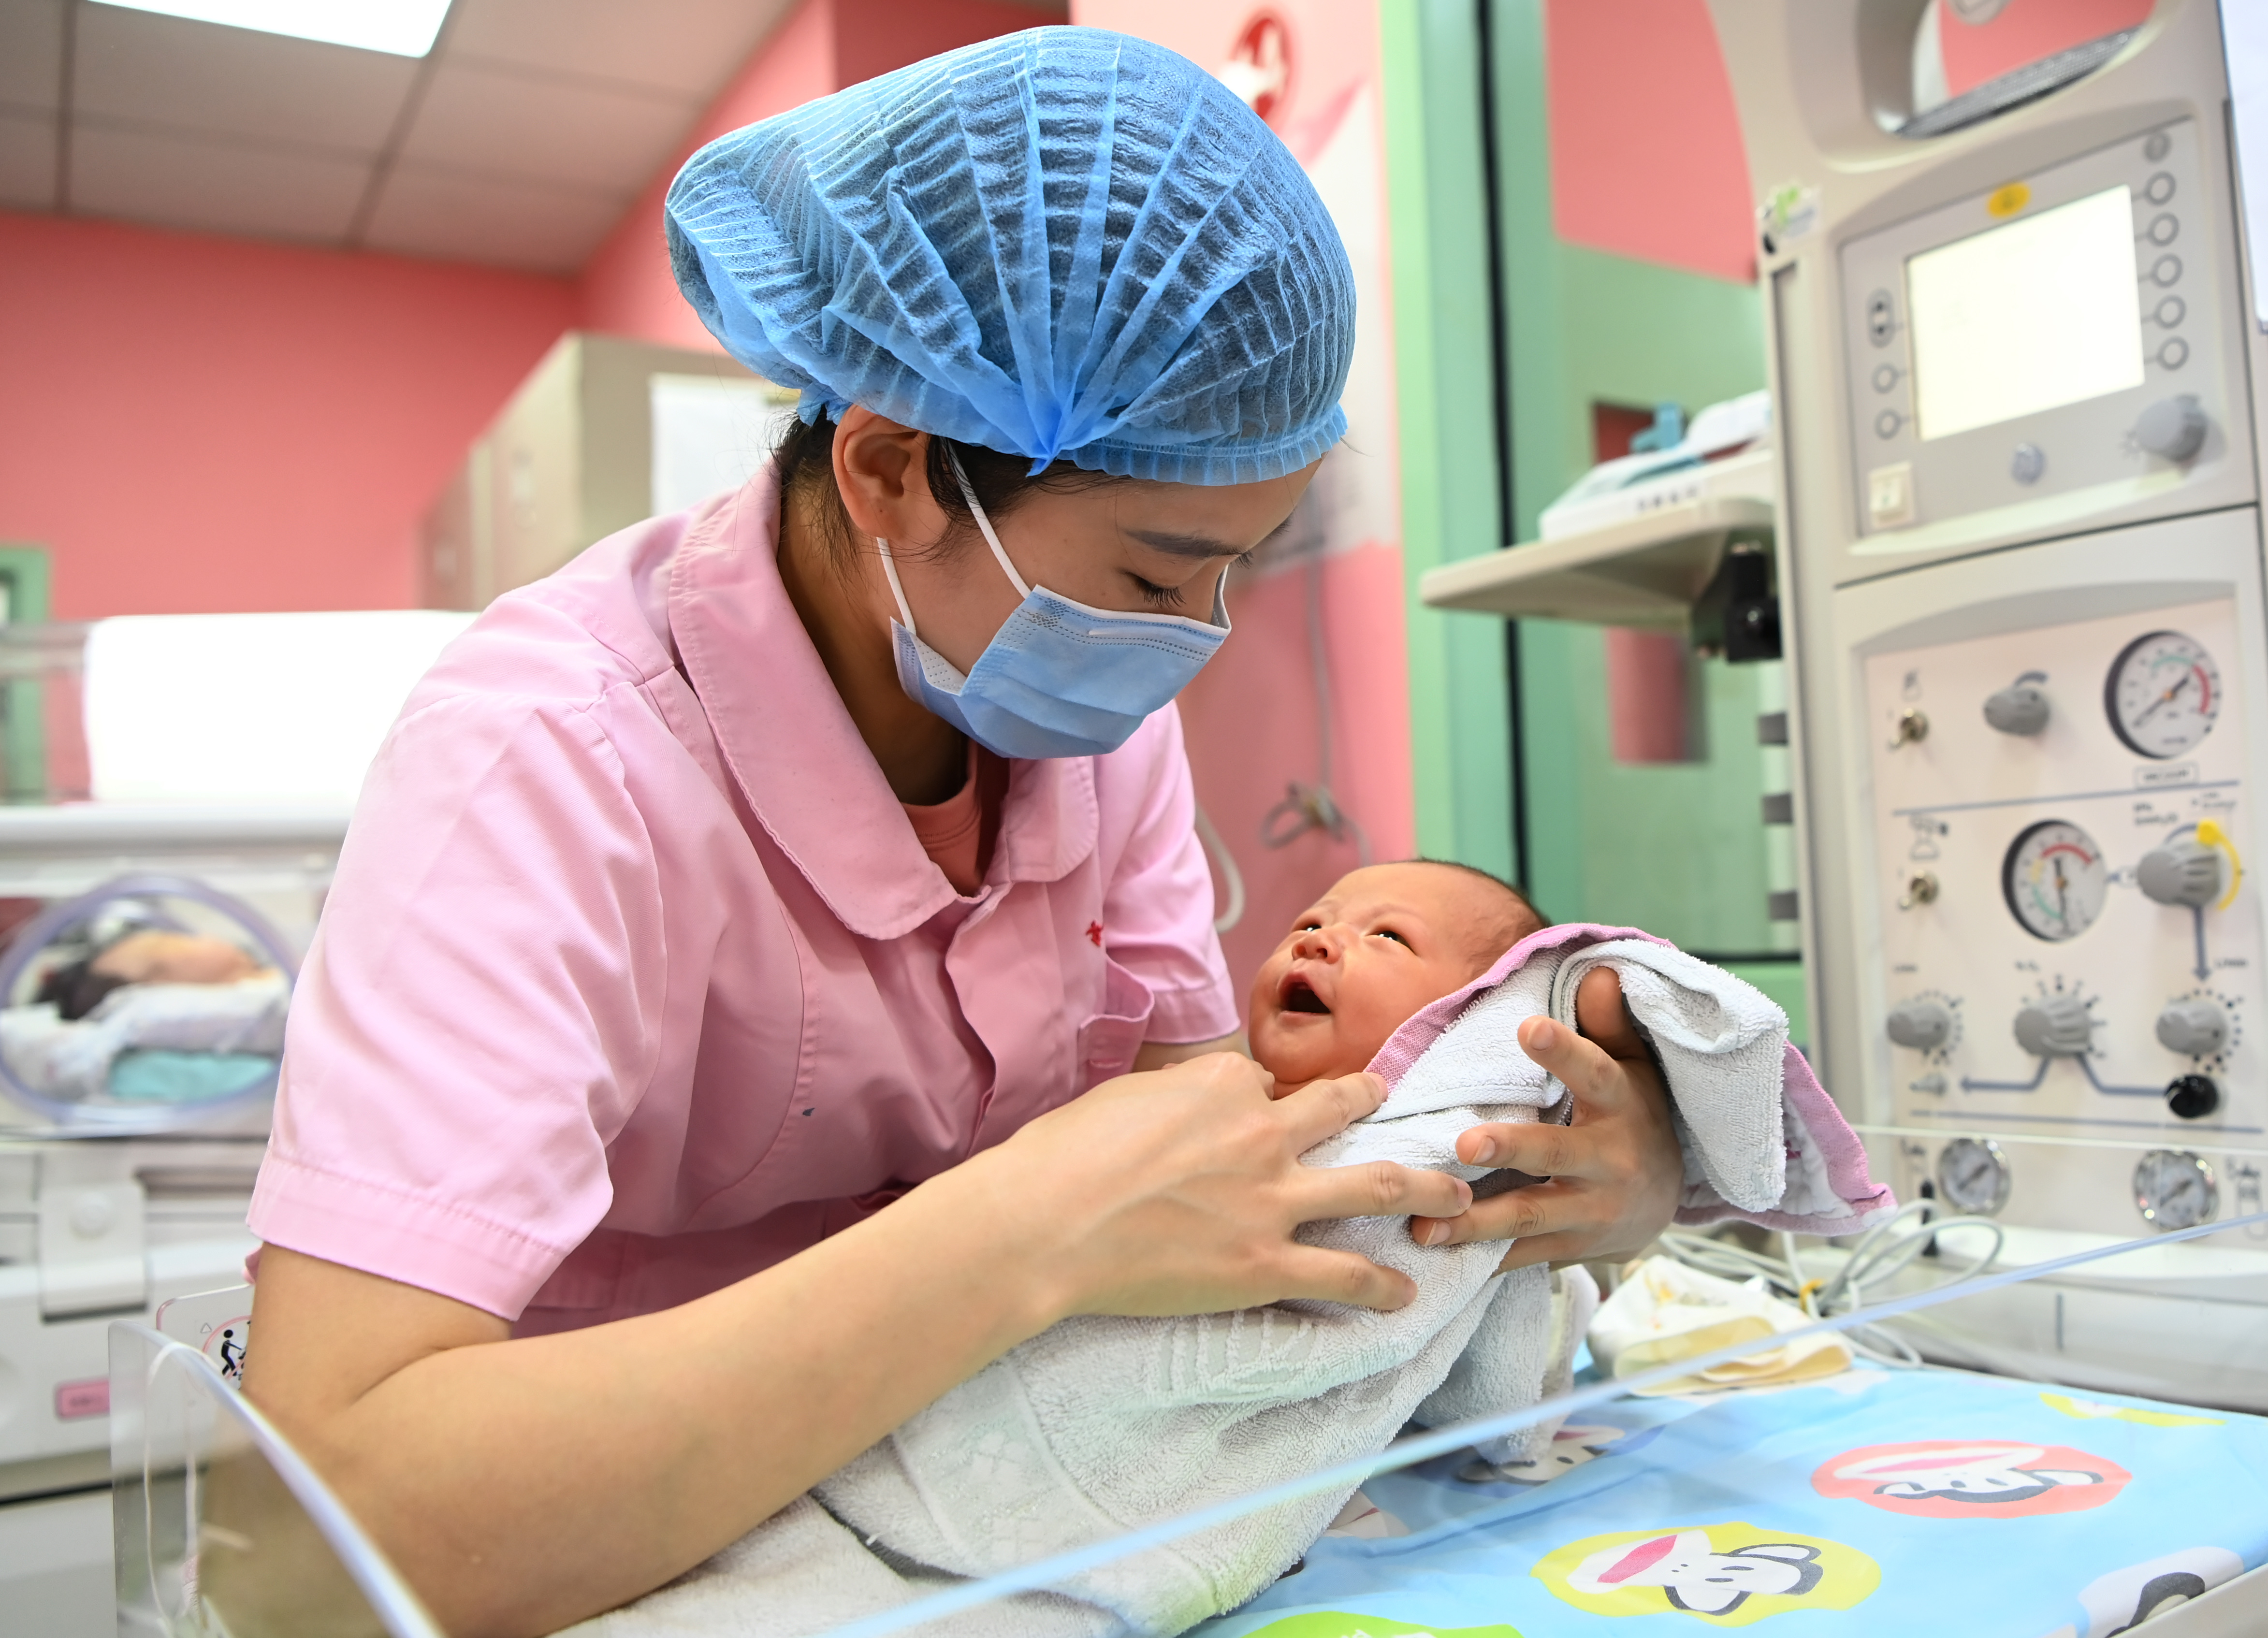 A nurse holds a newborn at a hospital in Chengdu, the capital of the Chinese province of Sichuan, on May 11, 2021. Starting Feb. 15, 2023, there will no longer be a limit on the number of childbirths a person can register in Sichuan. (An Yuan—China News Service/Getty Images)